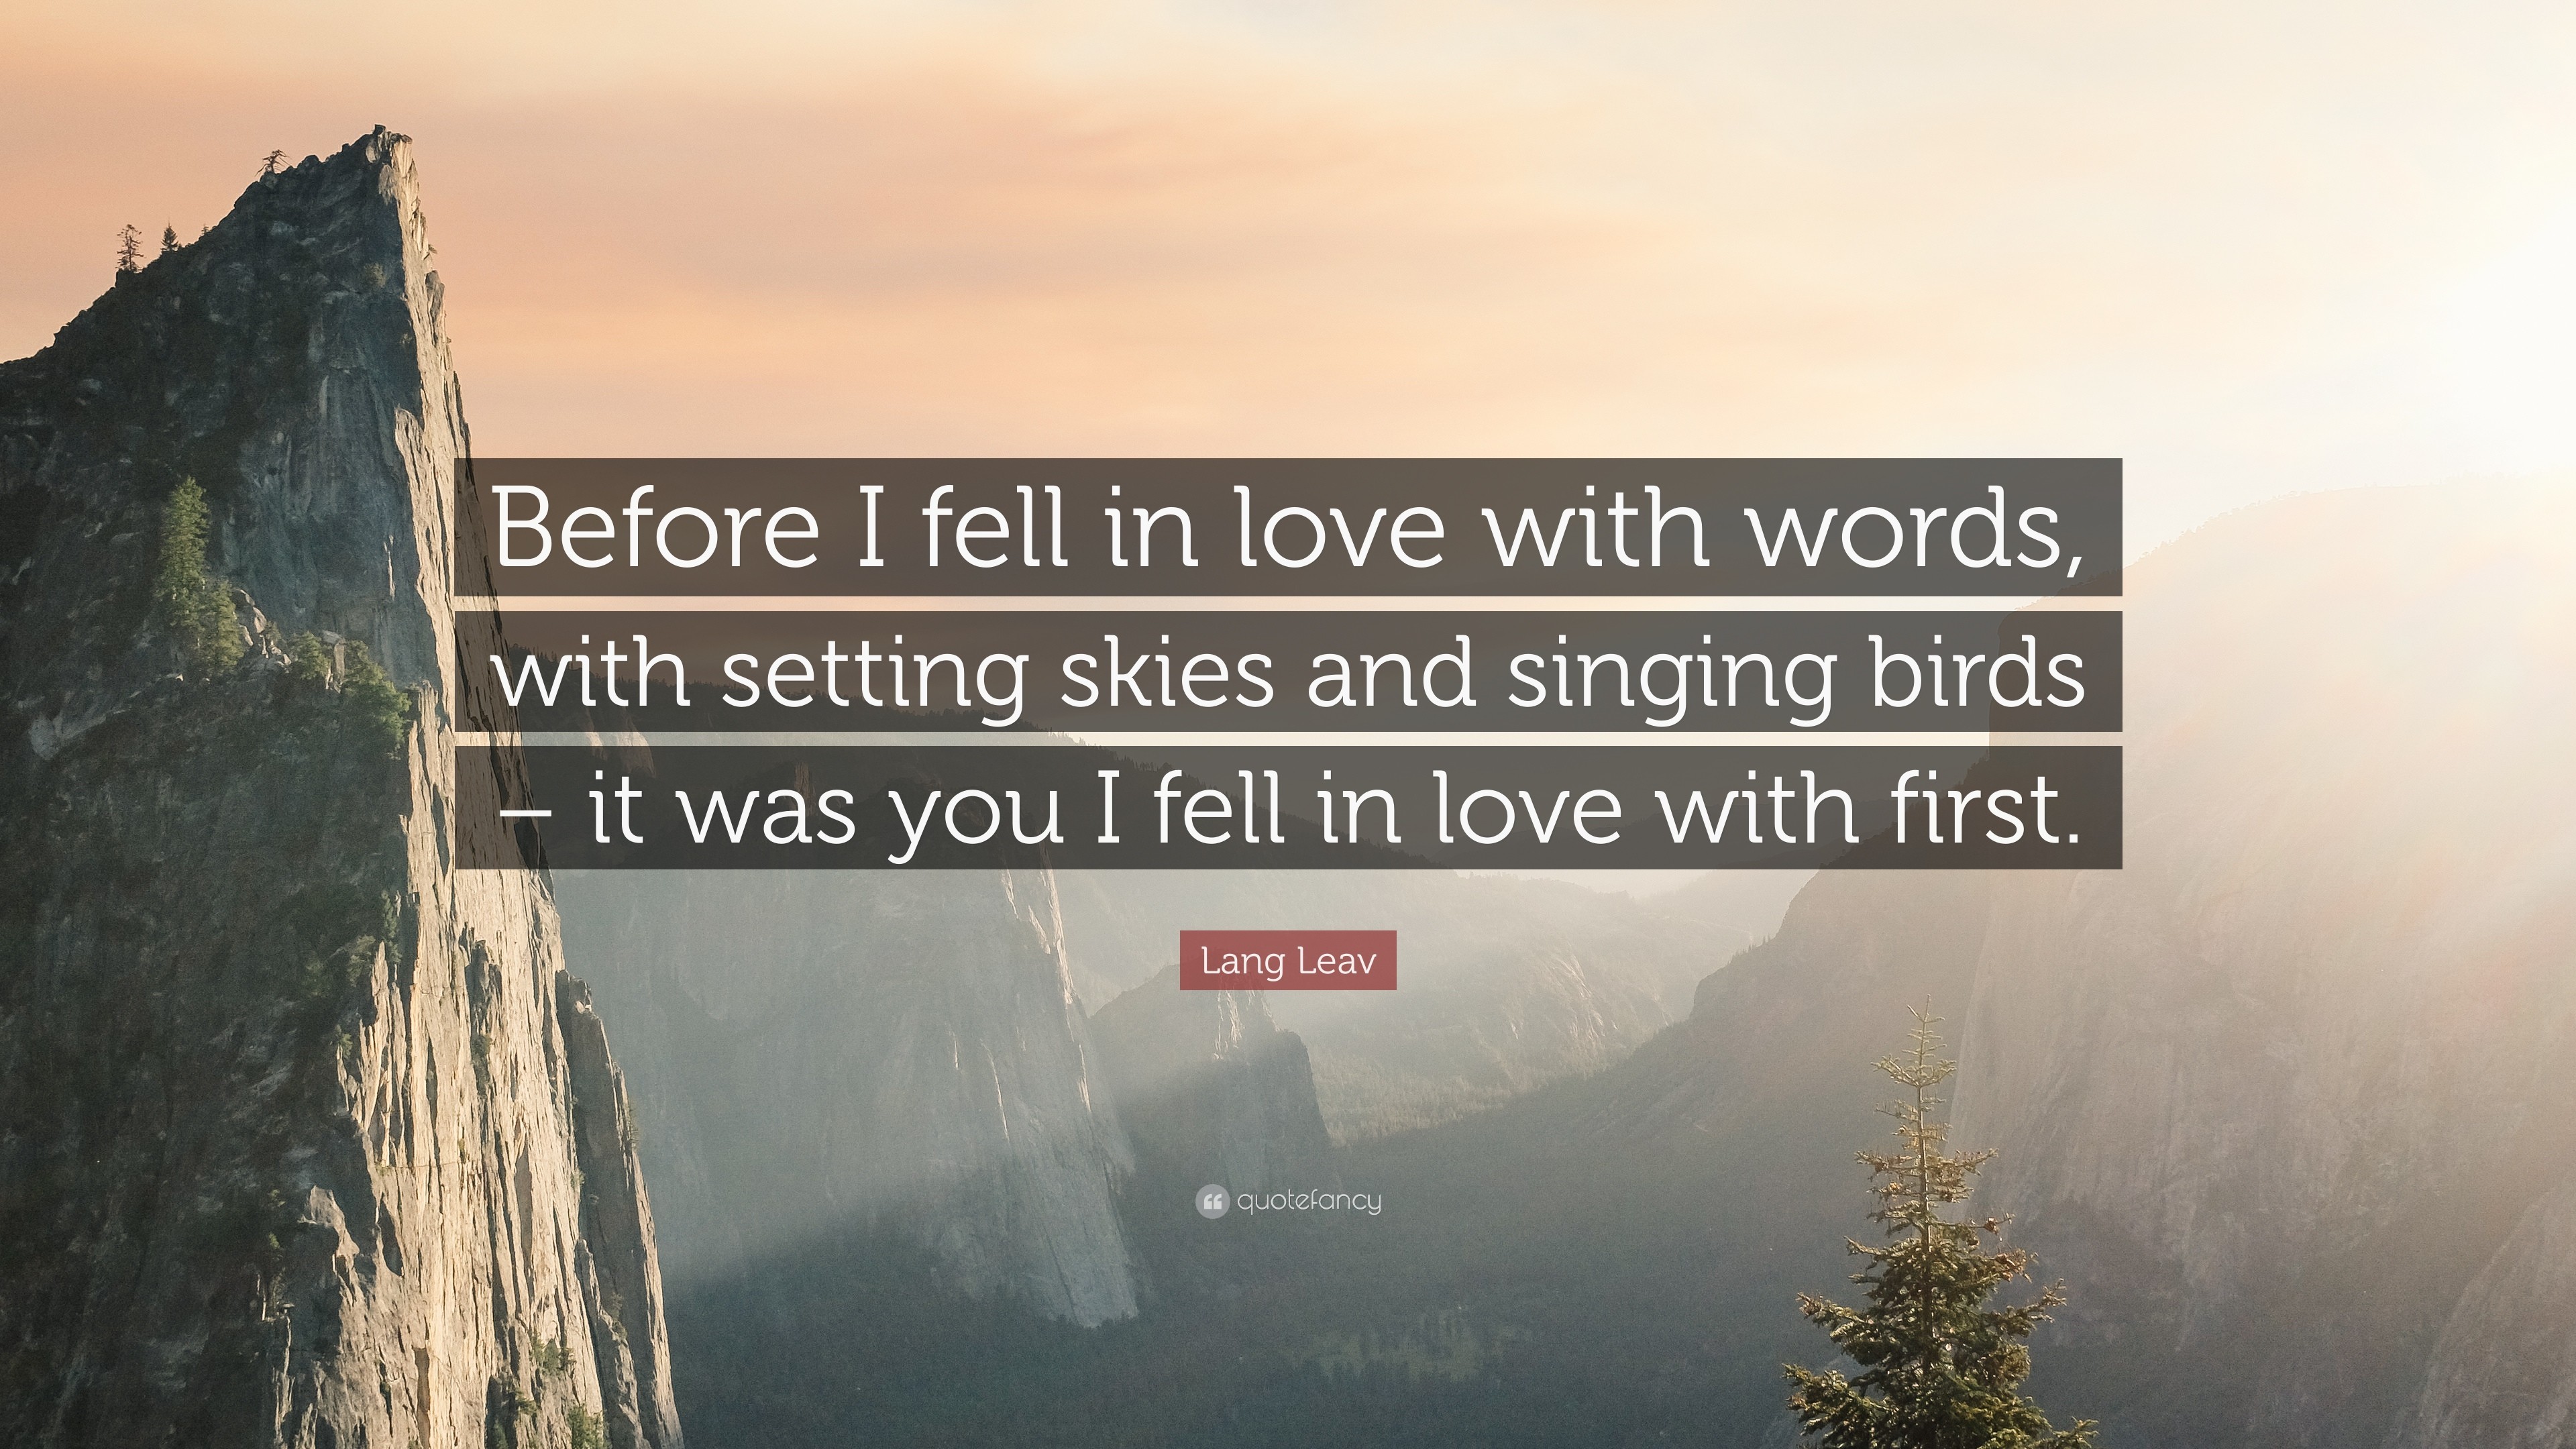 3840x2160 Lang Leav Quote: “Before I fell in love with words, with setting skies